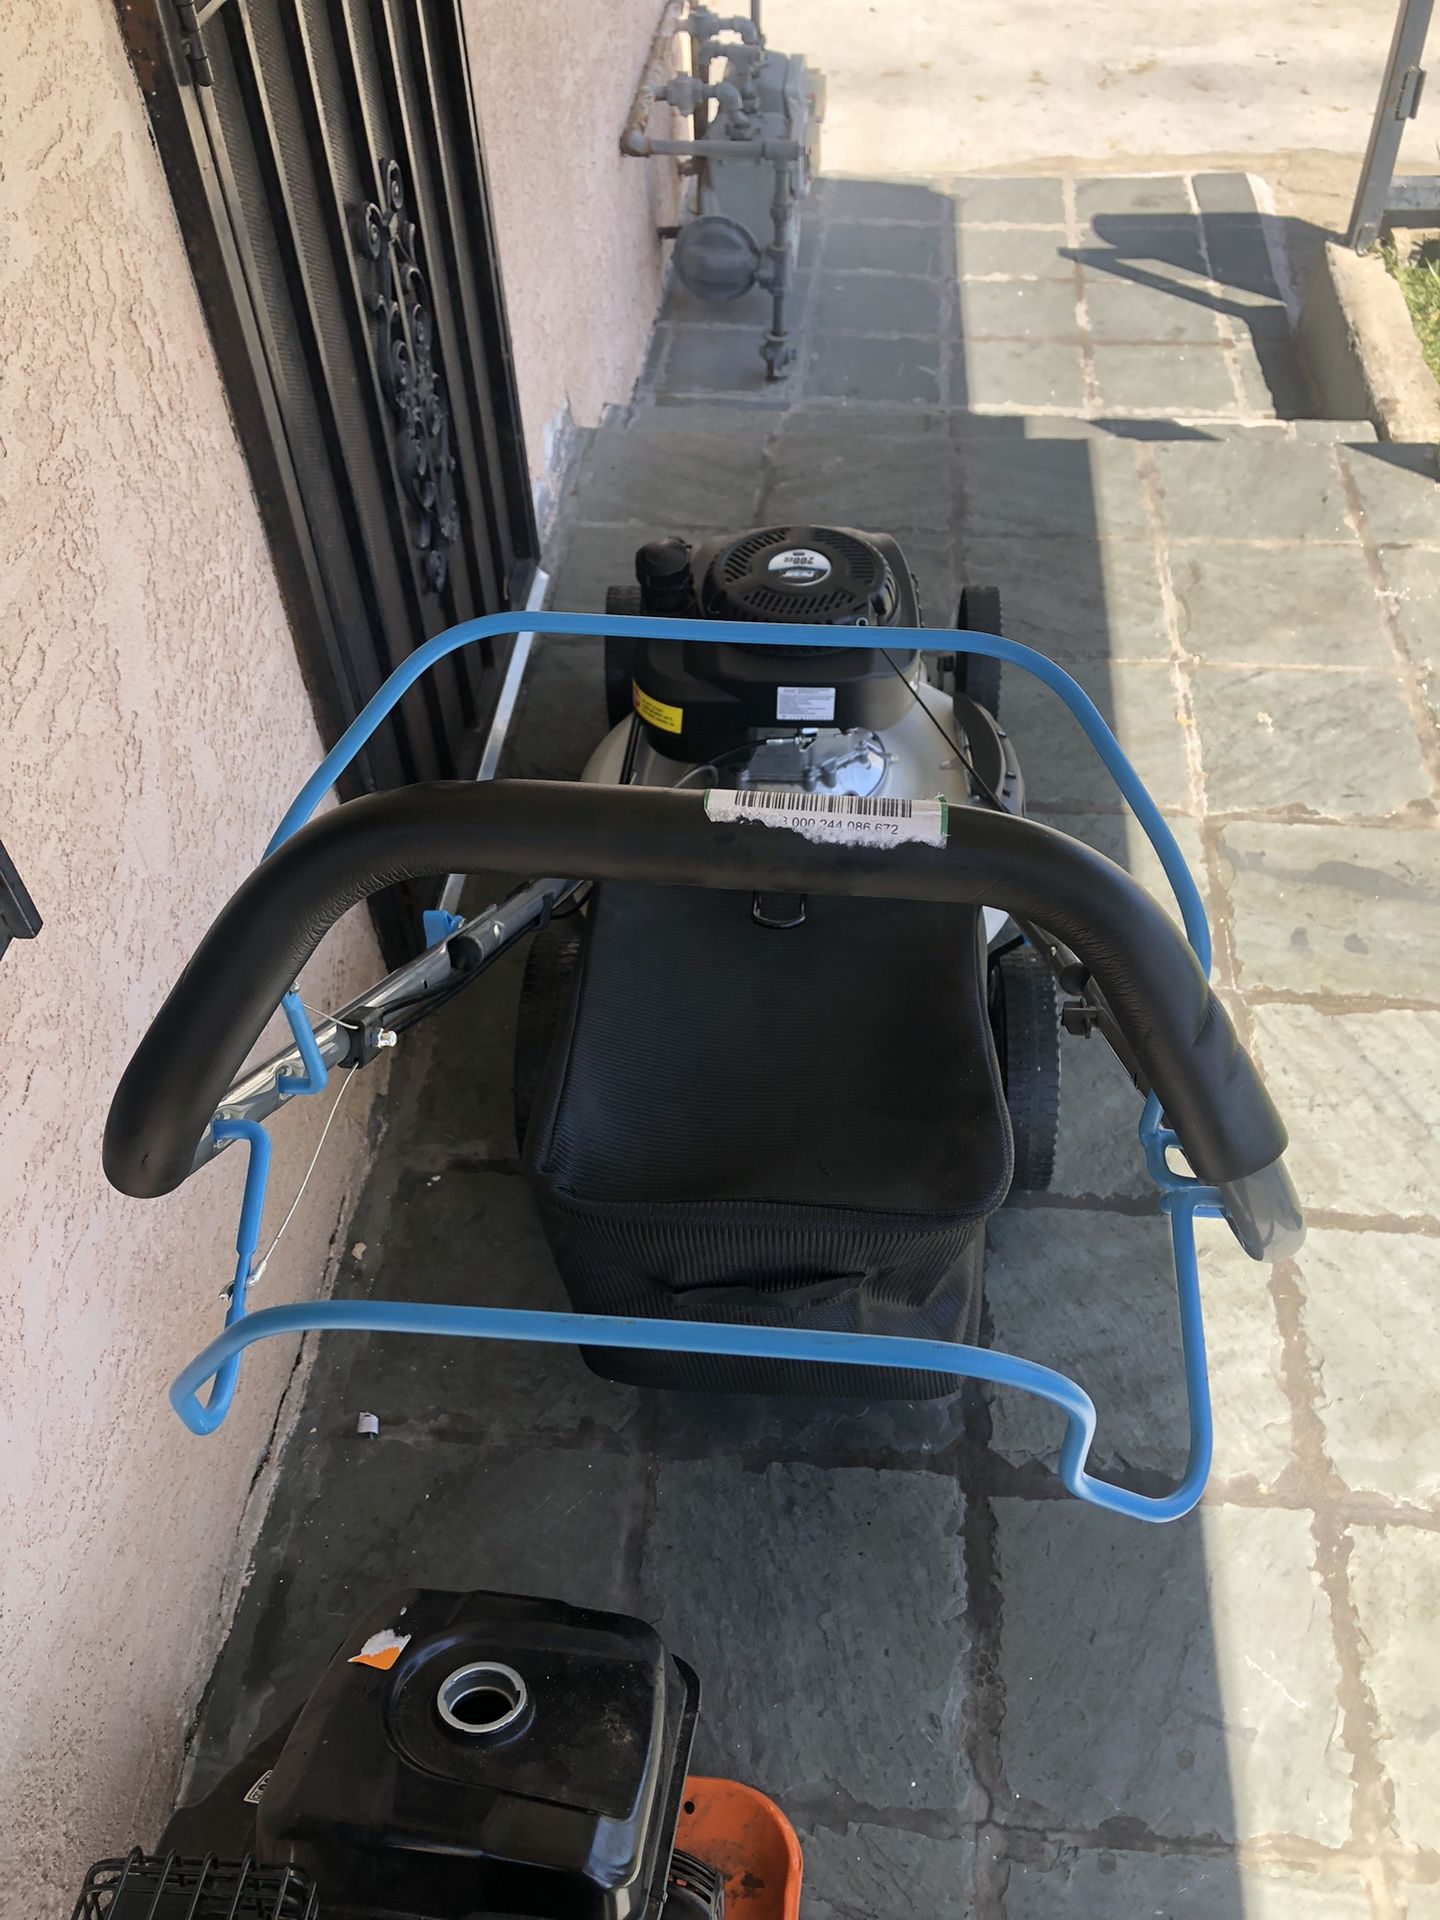 Pulsar 21 in. Self-Propelled 196 cc Gasoline Walk Behind Lawn Mower with 7  Position Height Adjustment for Sale in Ontario, CA - OfferUp